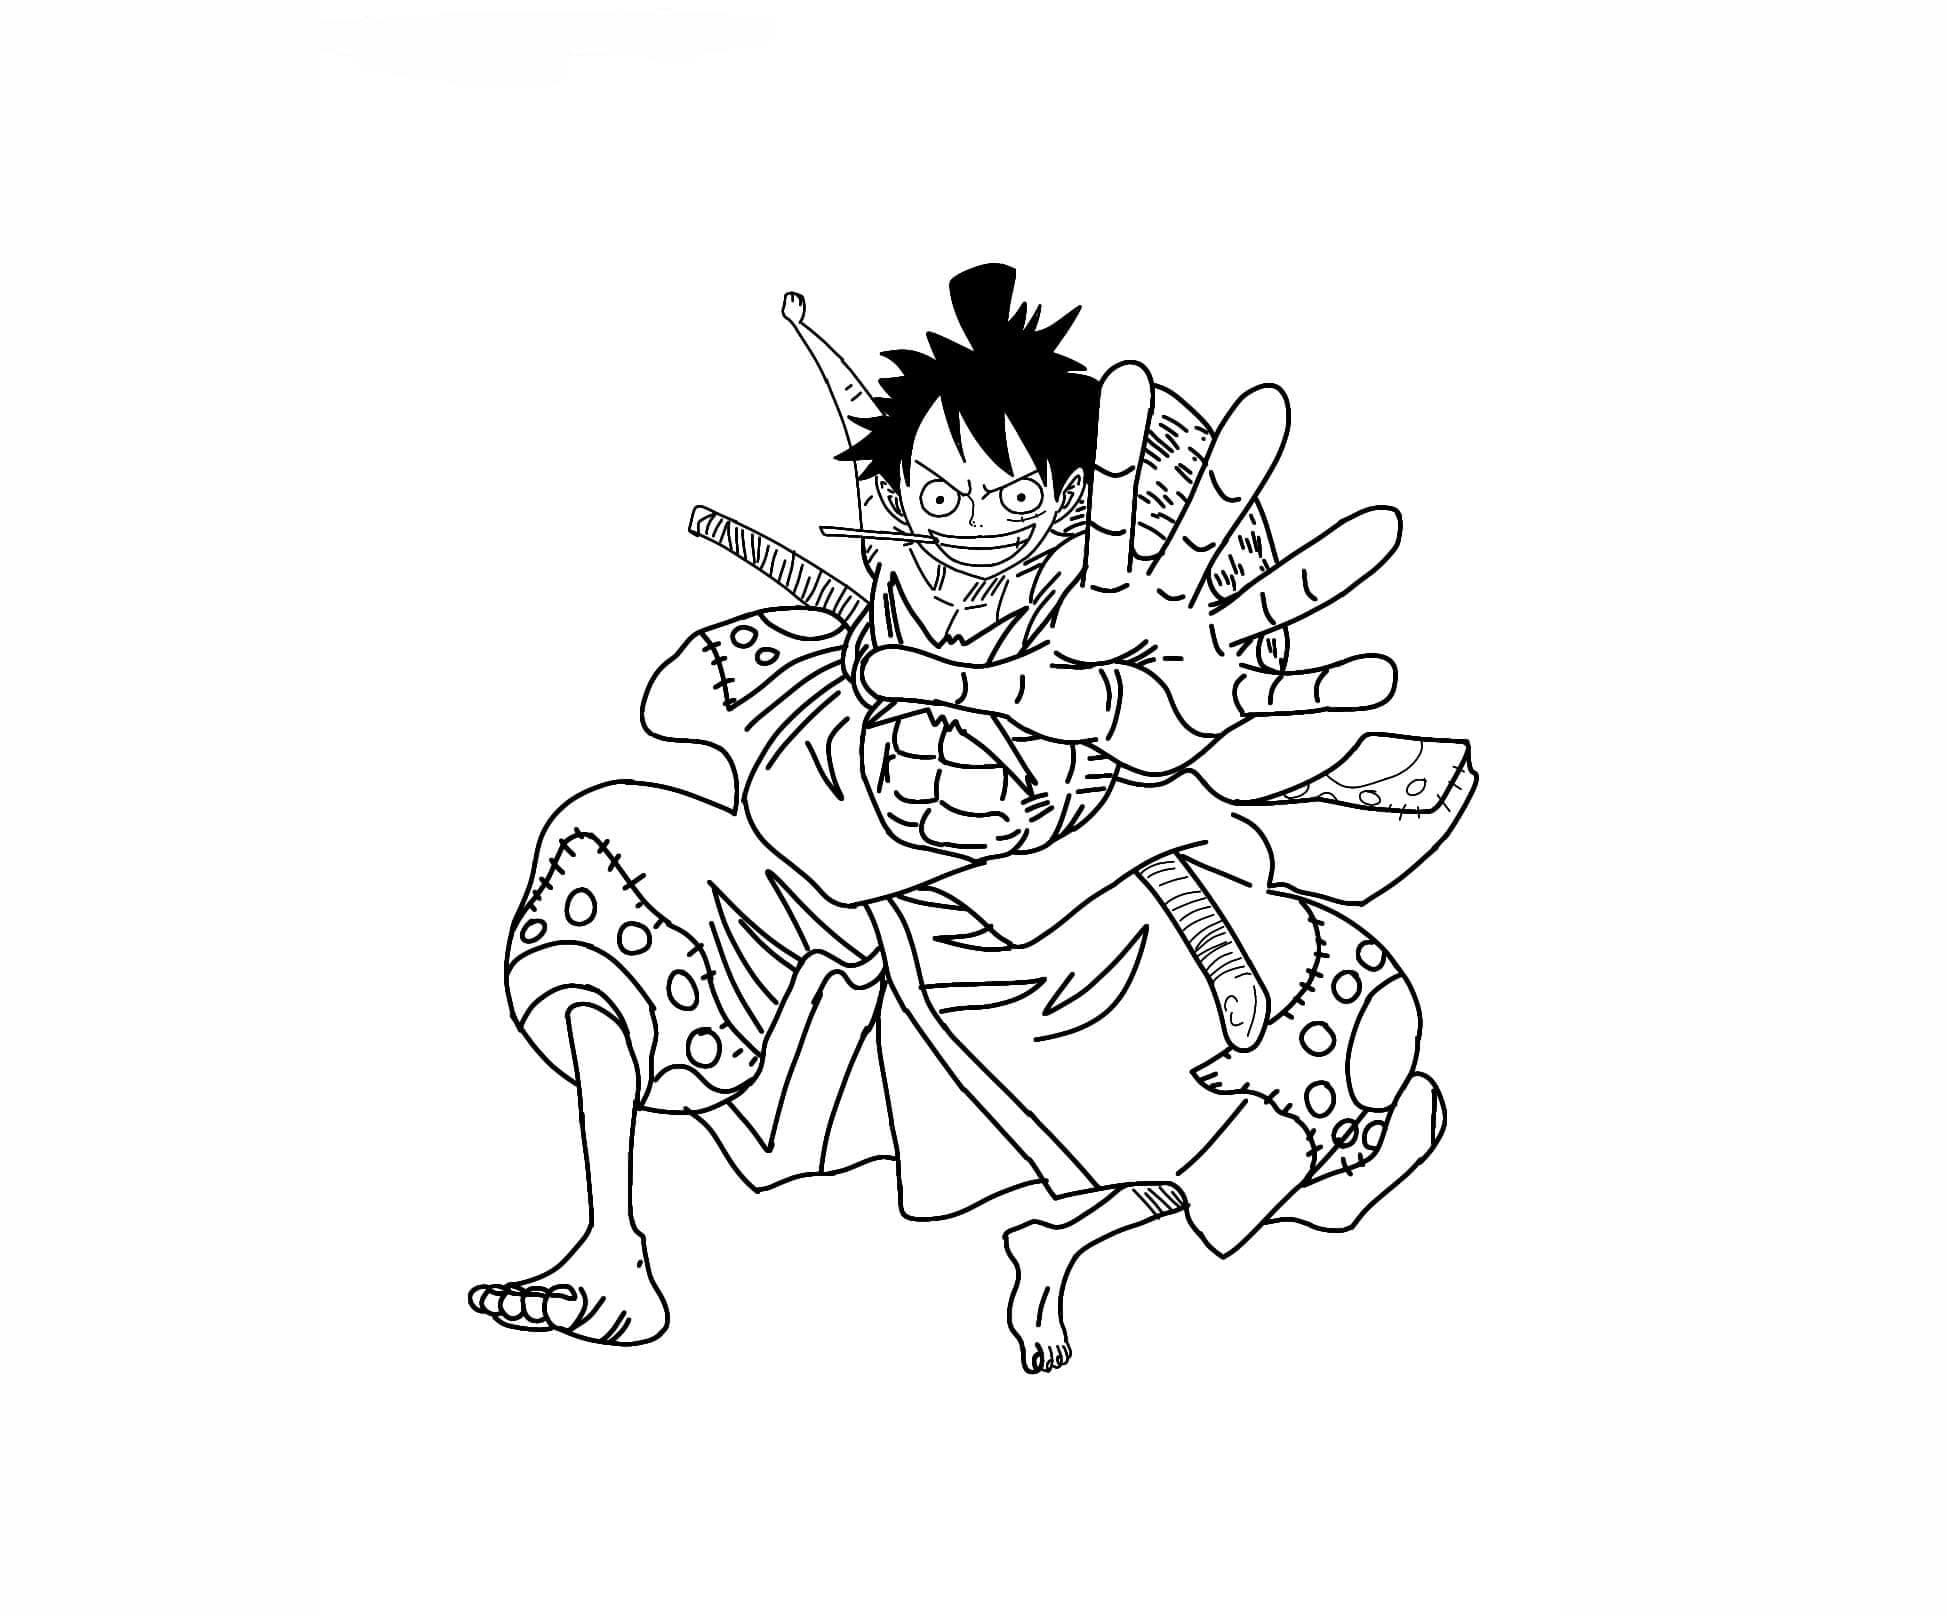 Monkey D Luffy One Piece Coloring Page To Print And Color The Best